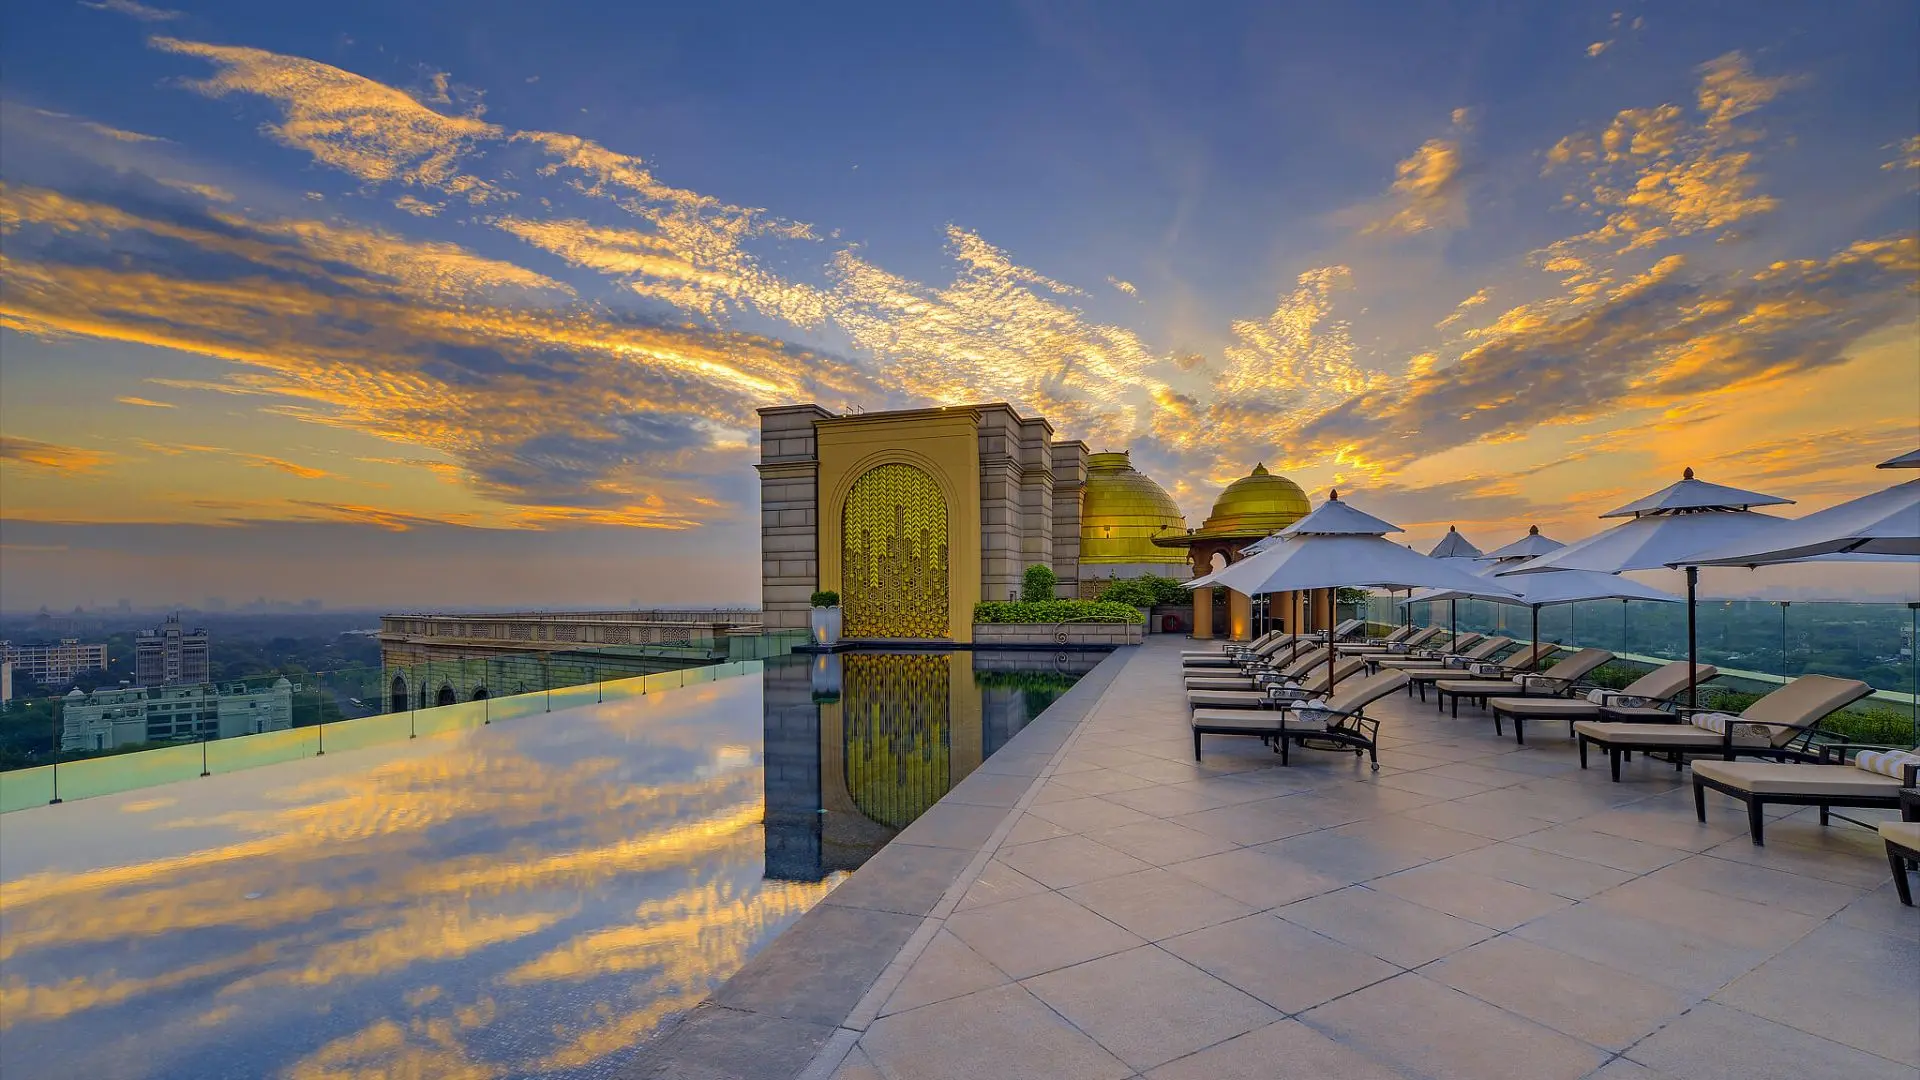 Hotels Toplists - The Best Luxury Hotels in Delhi and Agra